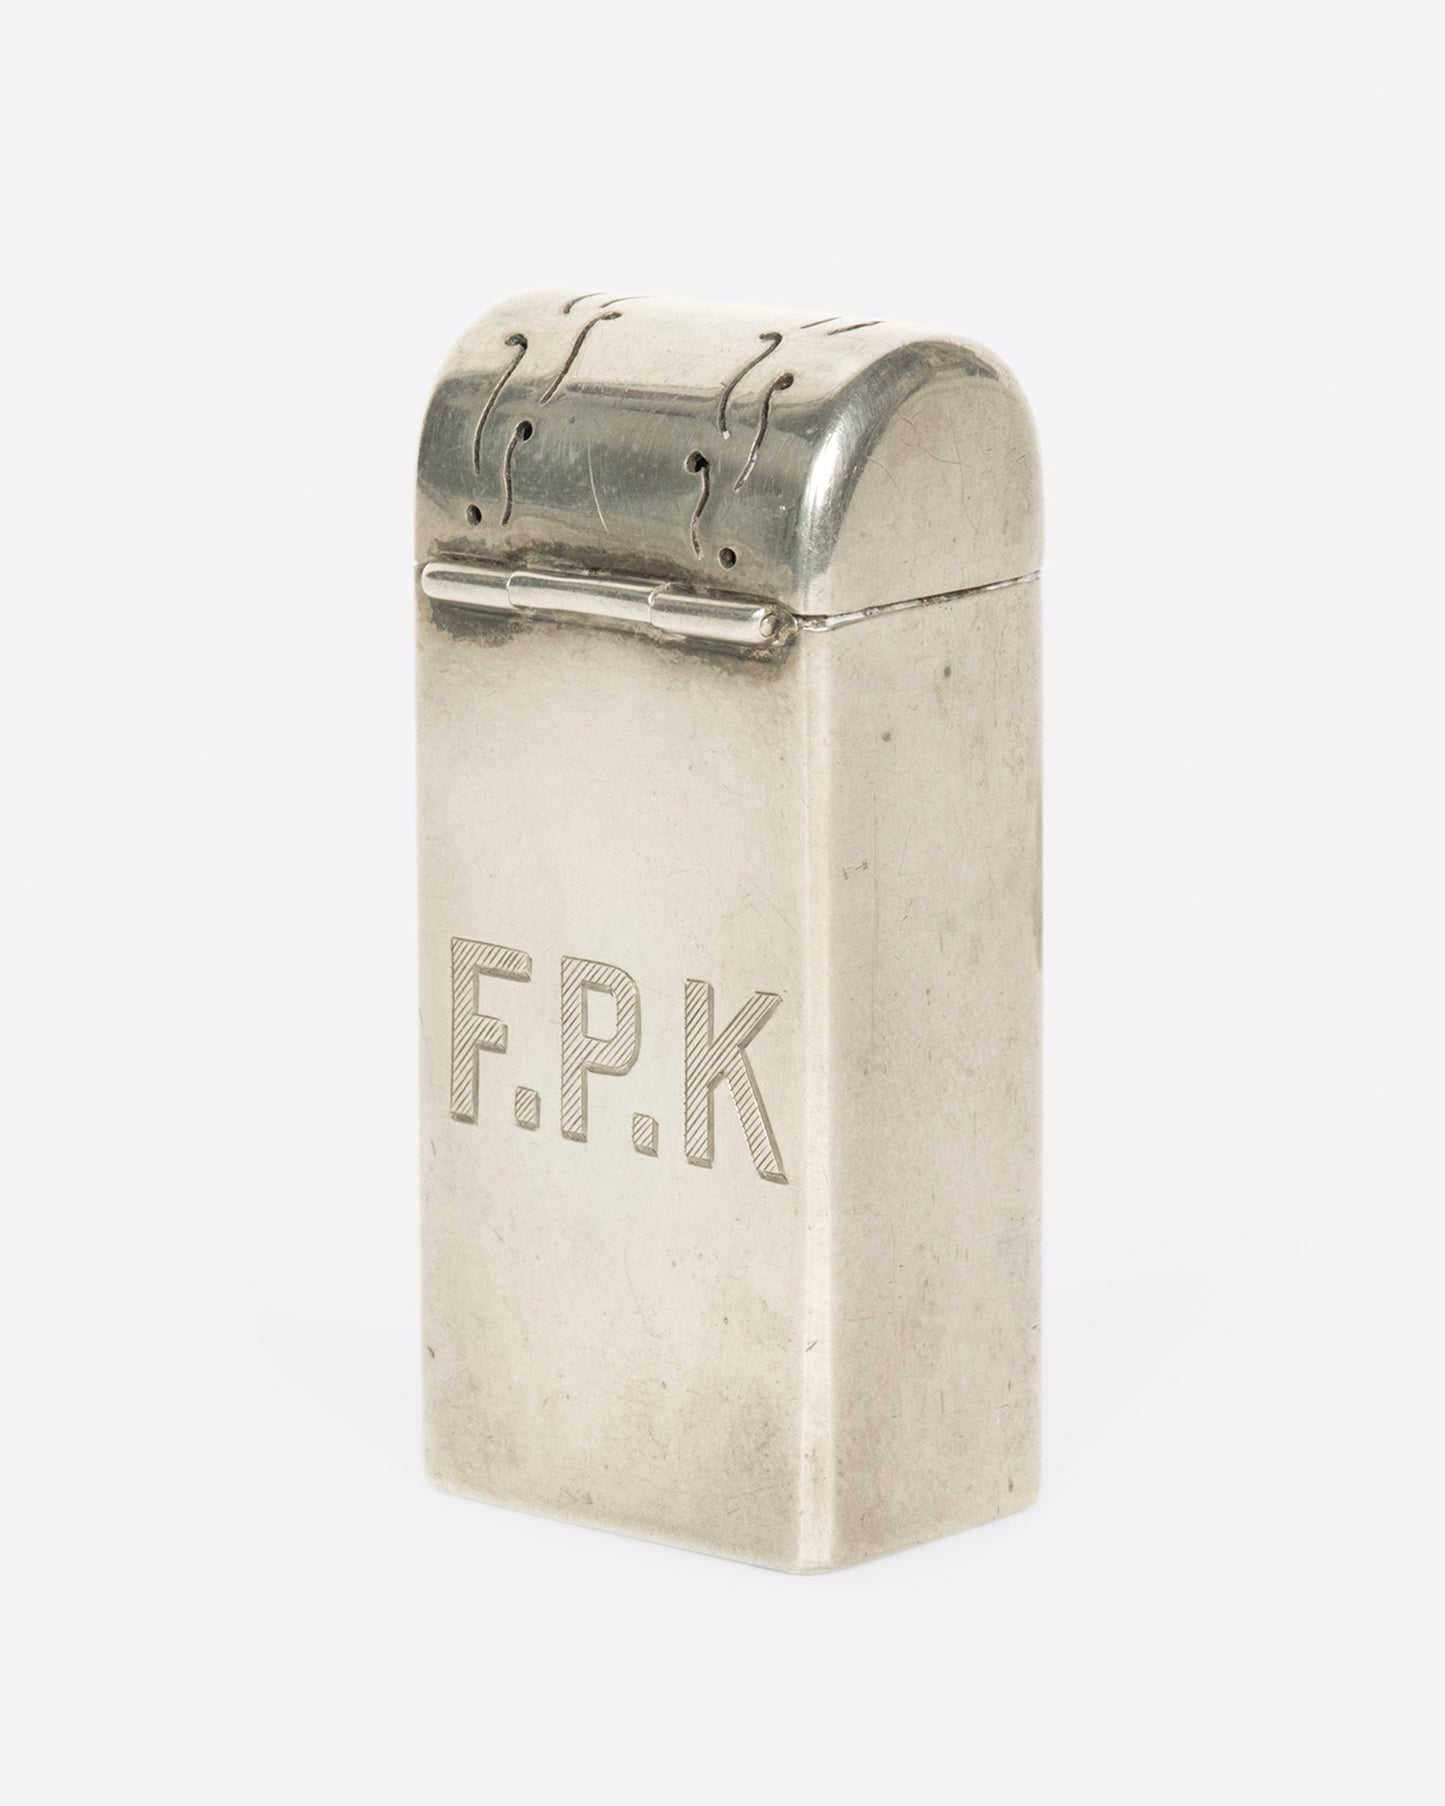 A vintage monogrammed toothbrush holder from Tiffany & Co. A one-of-a-kind gift for your favorite F.P.K.